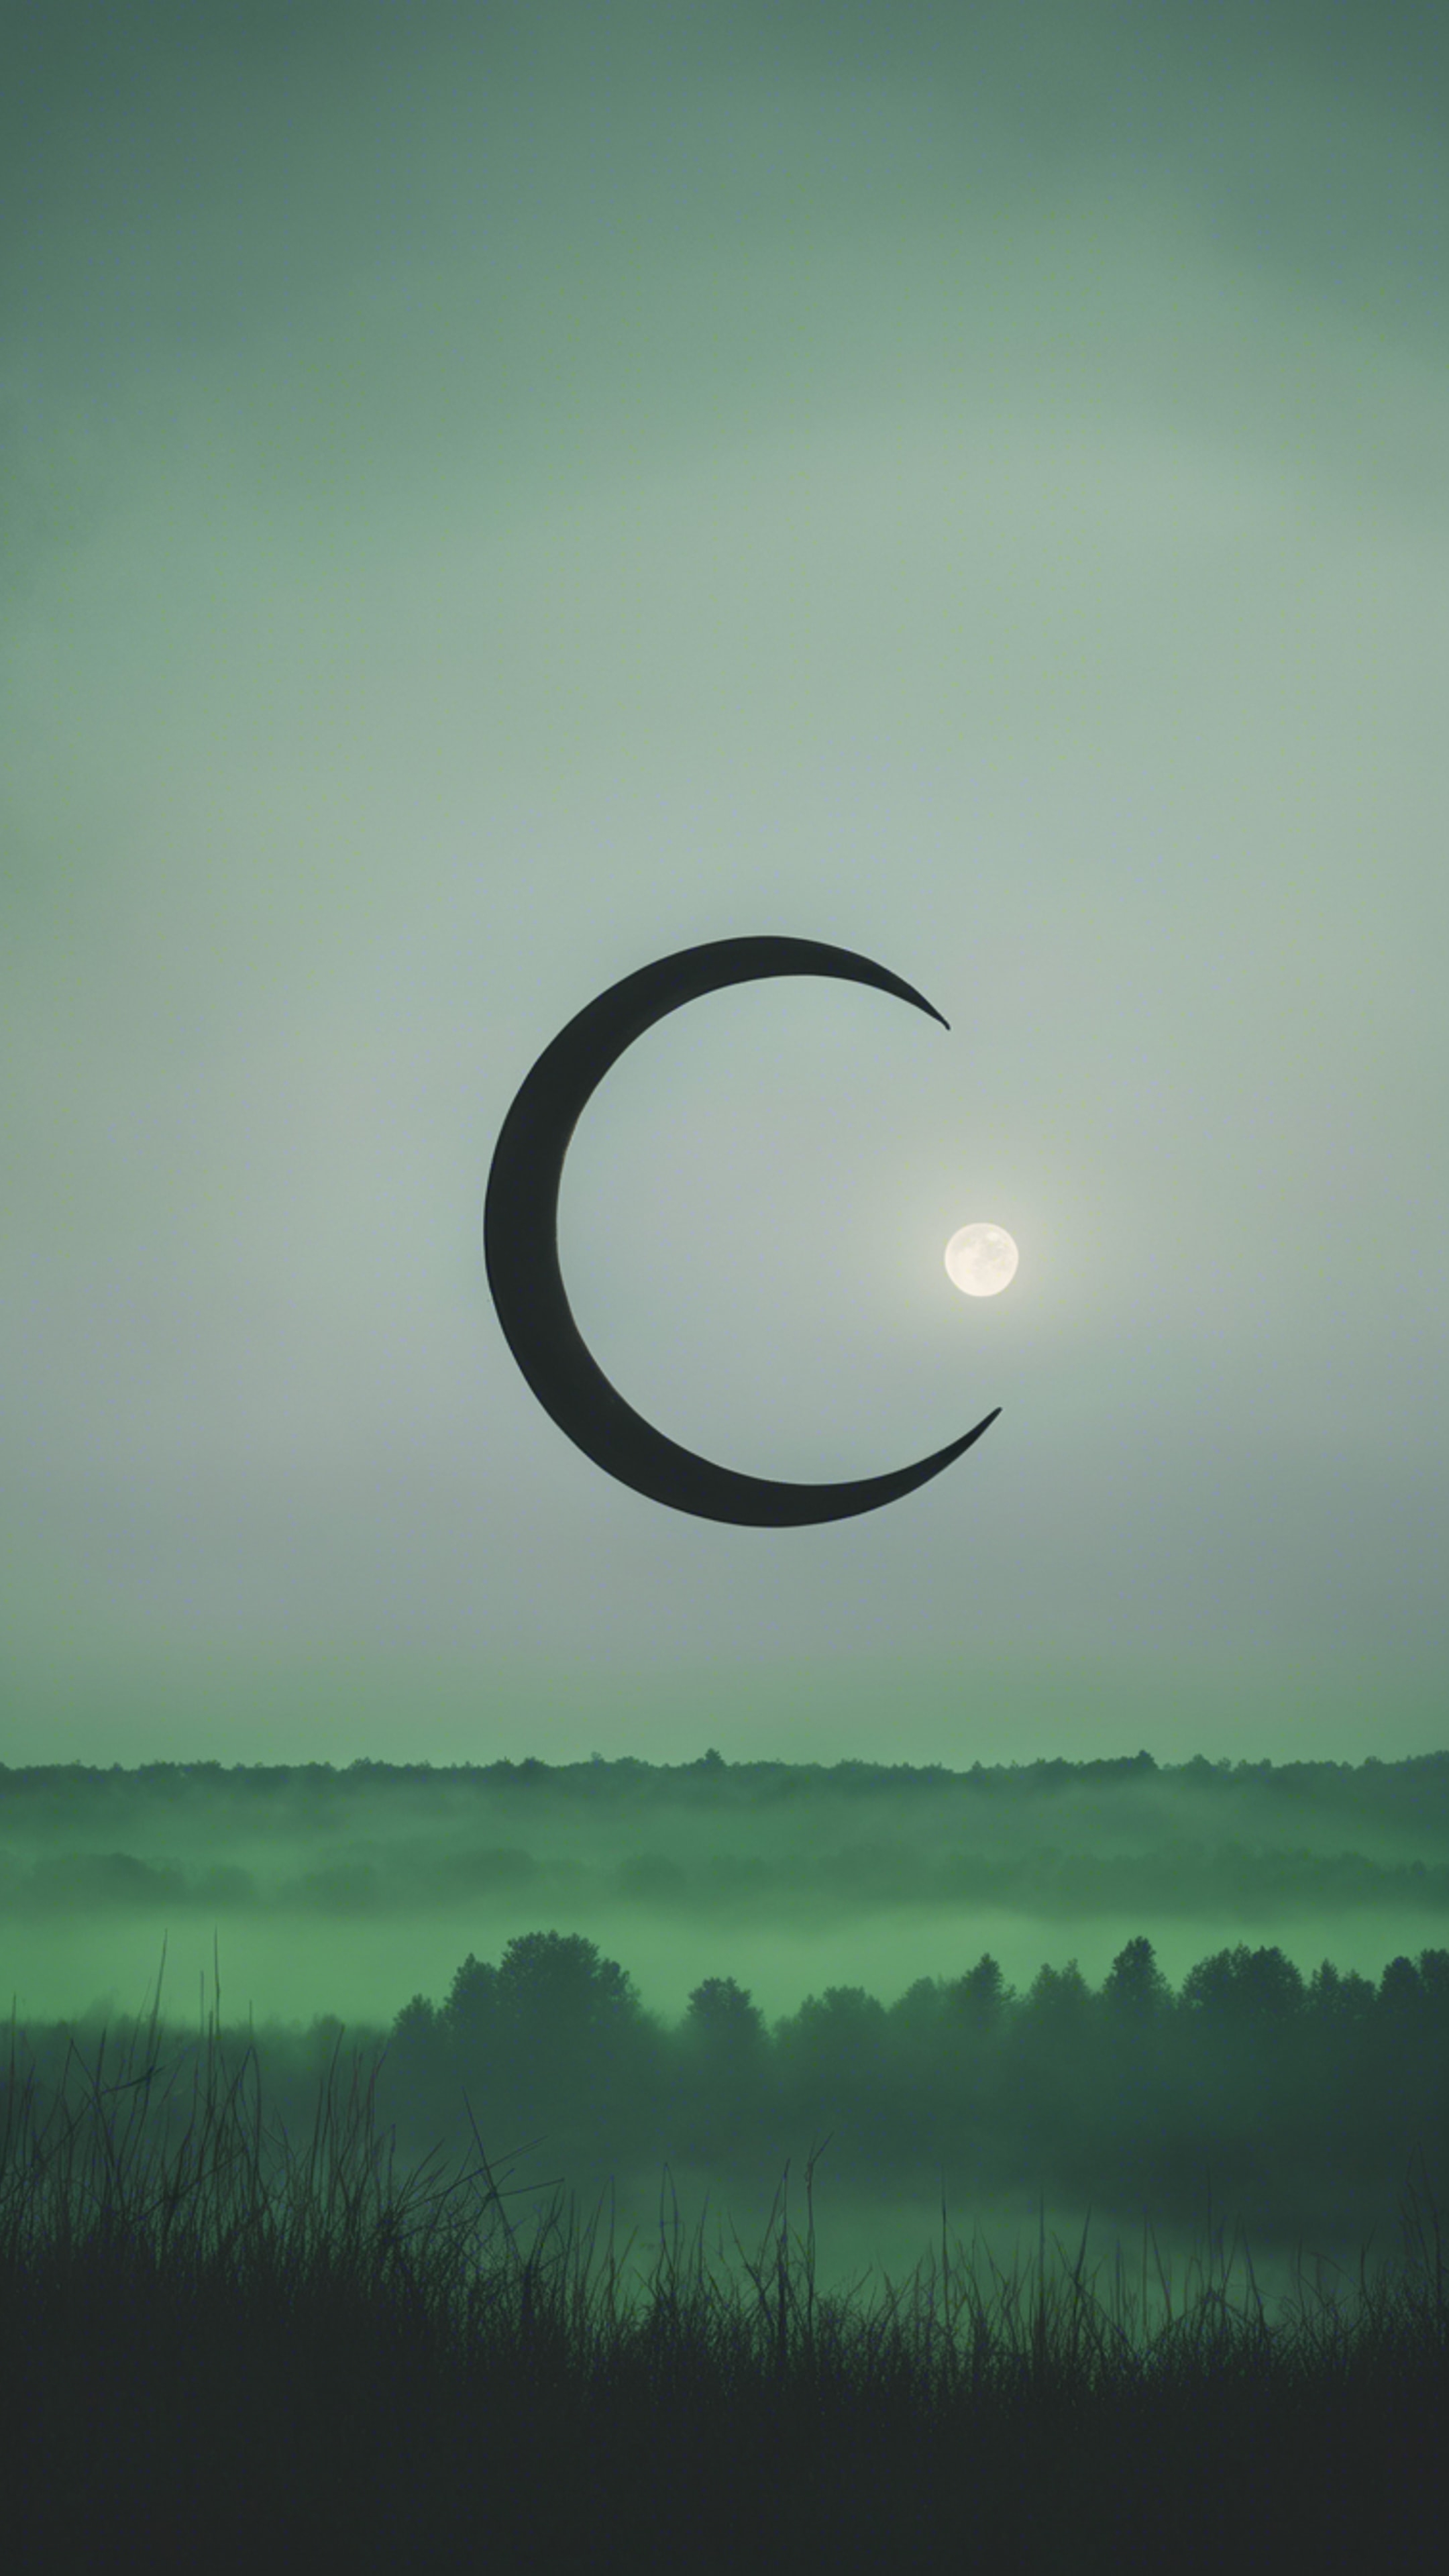 Gothic view of a black crescent moon under a green misty sky. Wallpaper[13b0789ef30c4bbcb3bb]